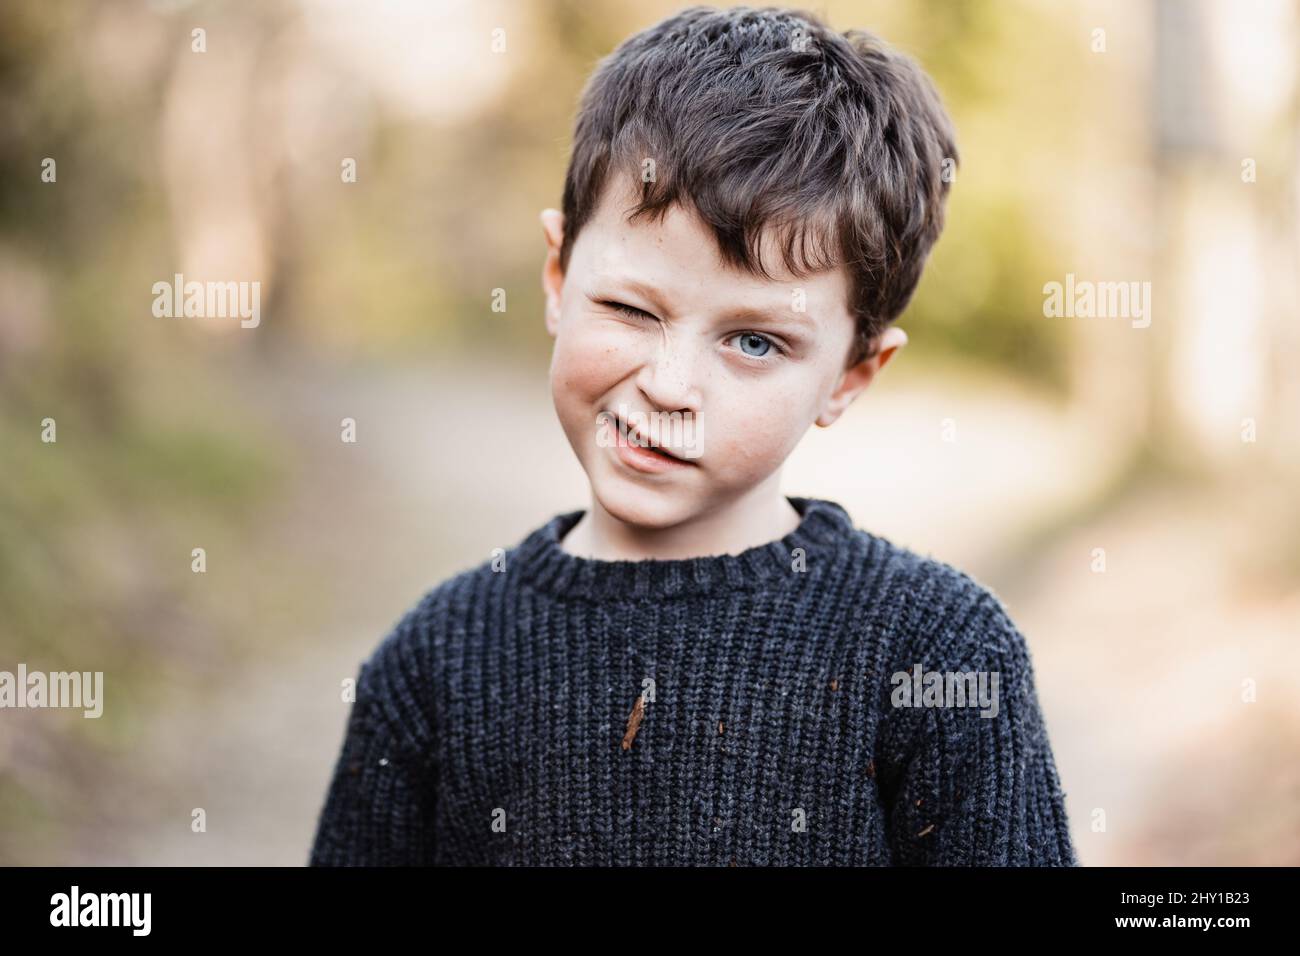 Cute little boy with blue eyes wearing warm sweater winking and looking at camera Stock Photo